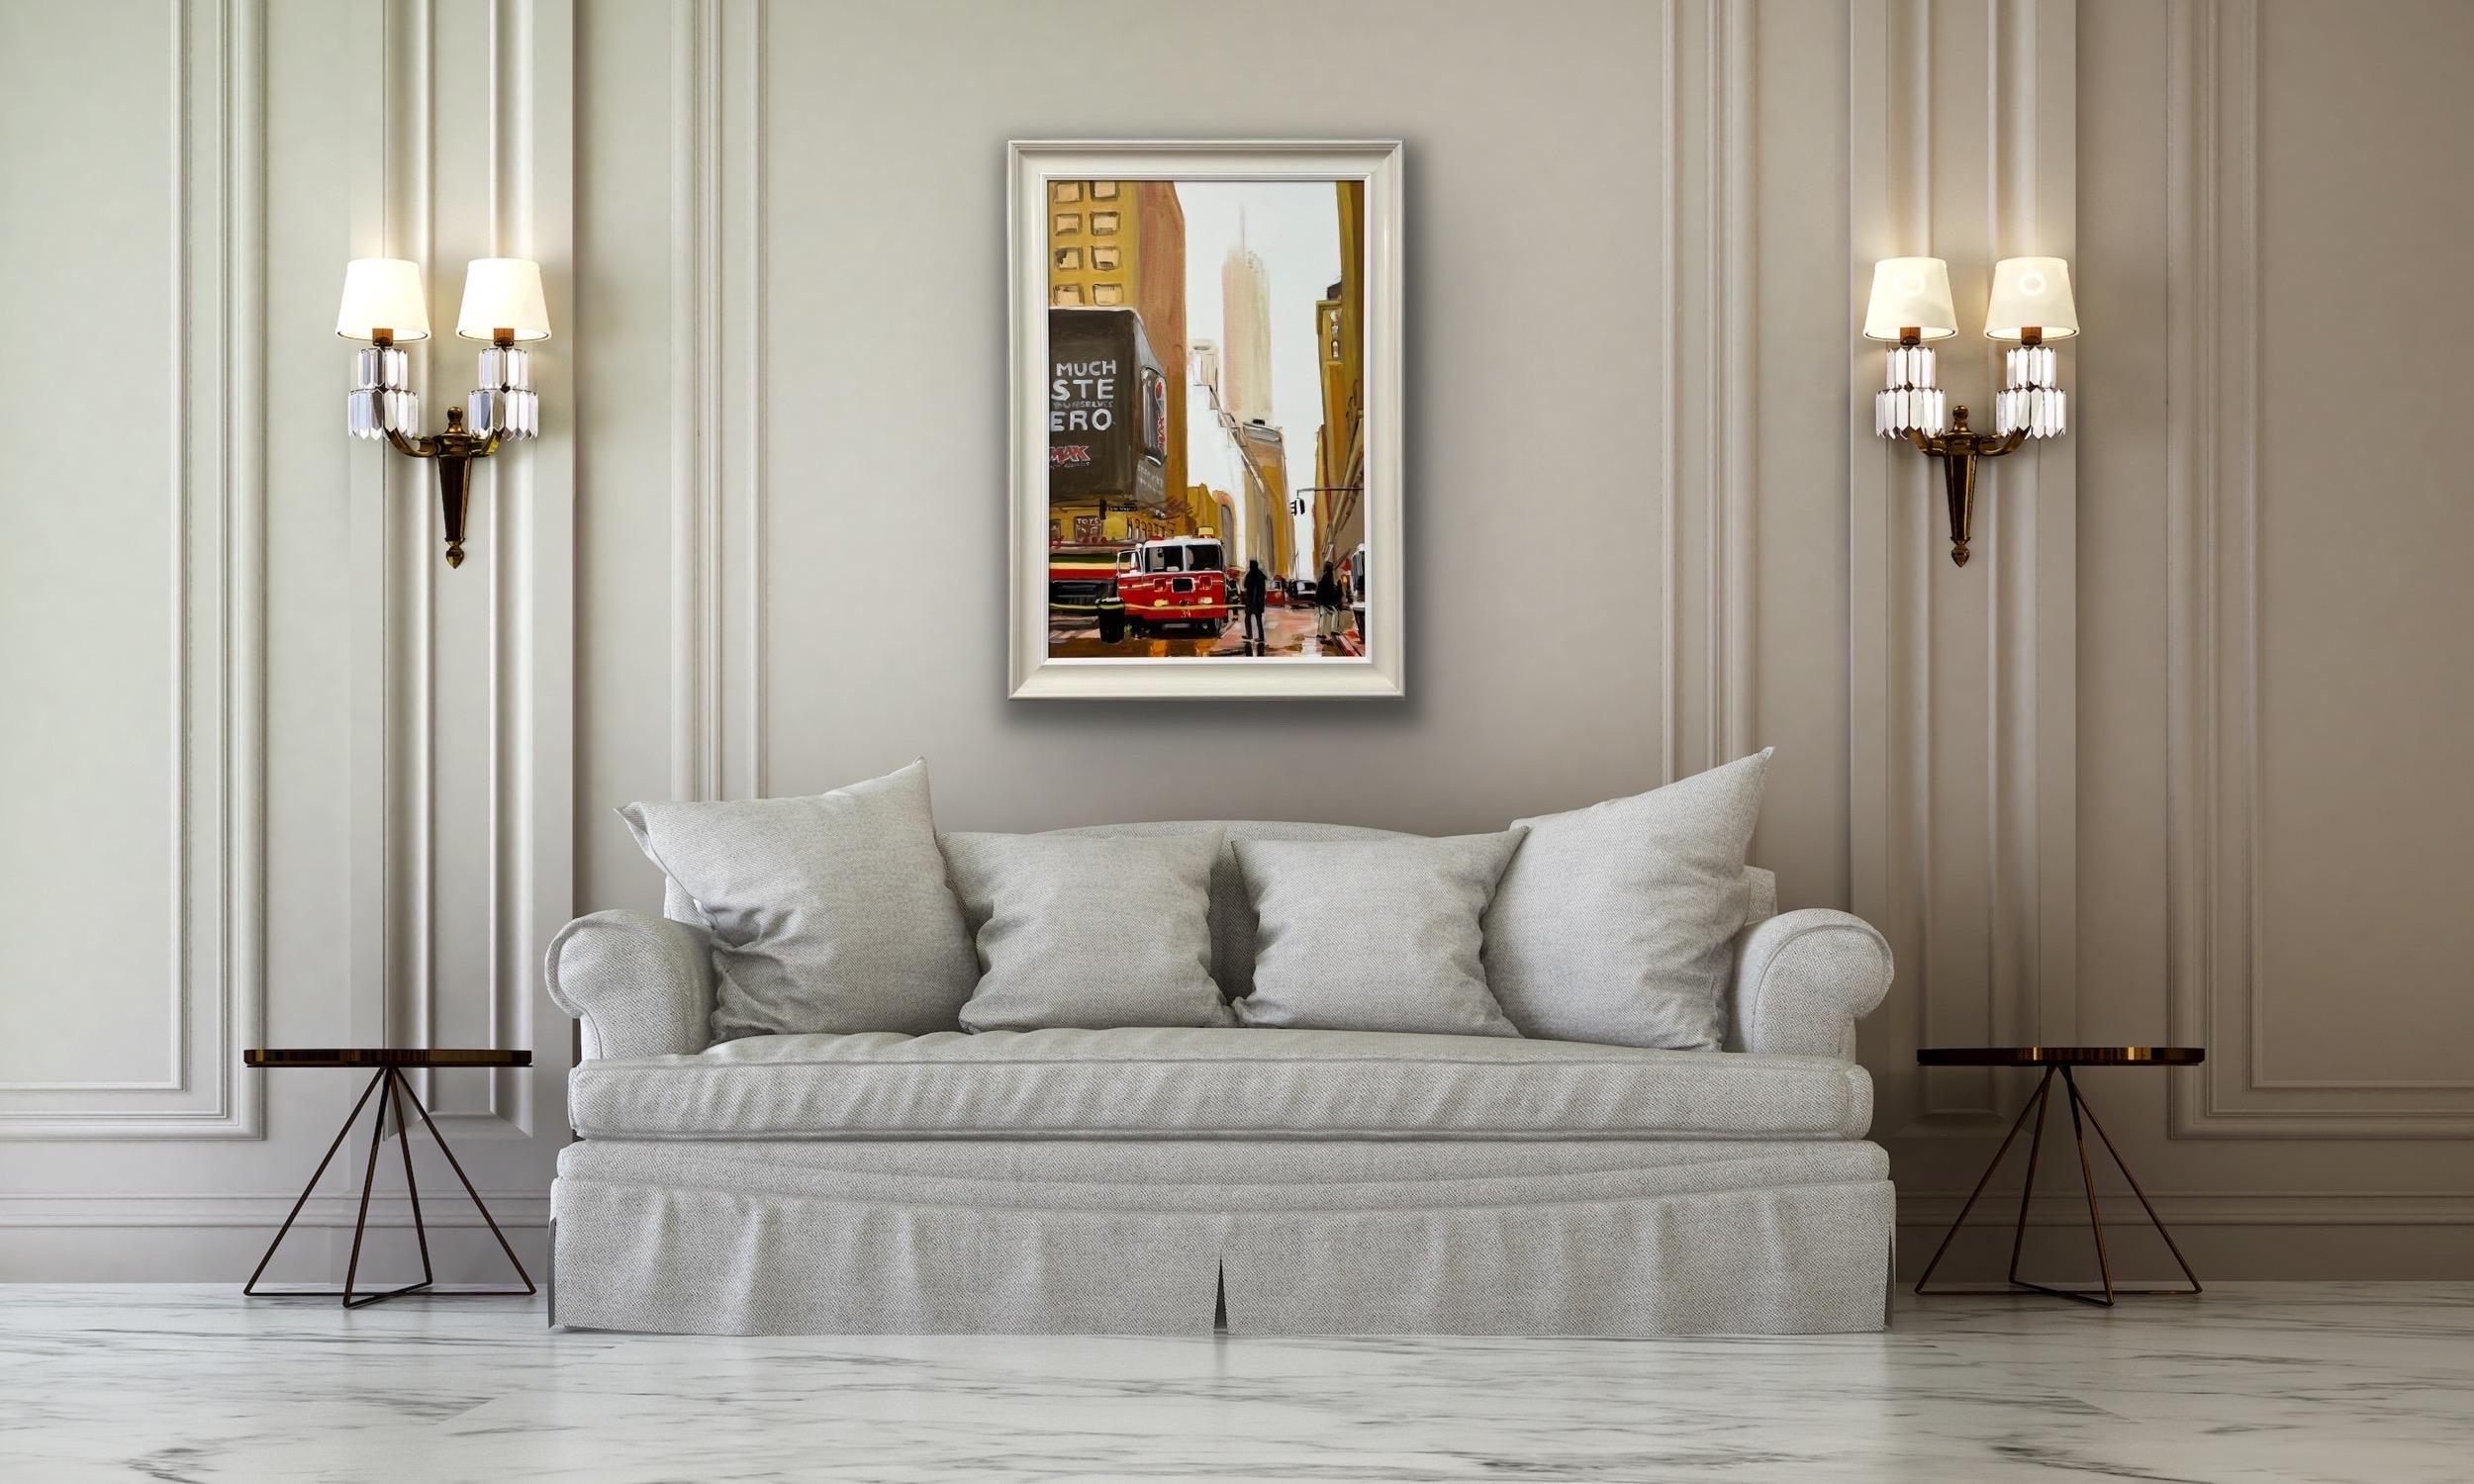 Painting of New York City Fire Department in New York City by Contemporary British Artist, Angela Wakefield.

Art measures 36 x 24 inches 
Frame measures 41 x 29 inches 

Angela Wakefield has twice been on the front cover of ‘Art of England’ and